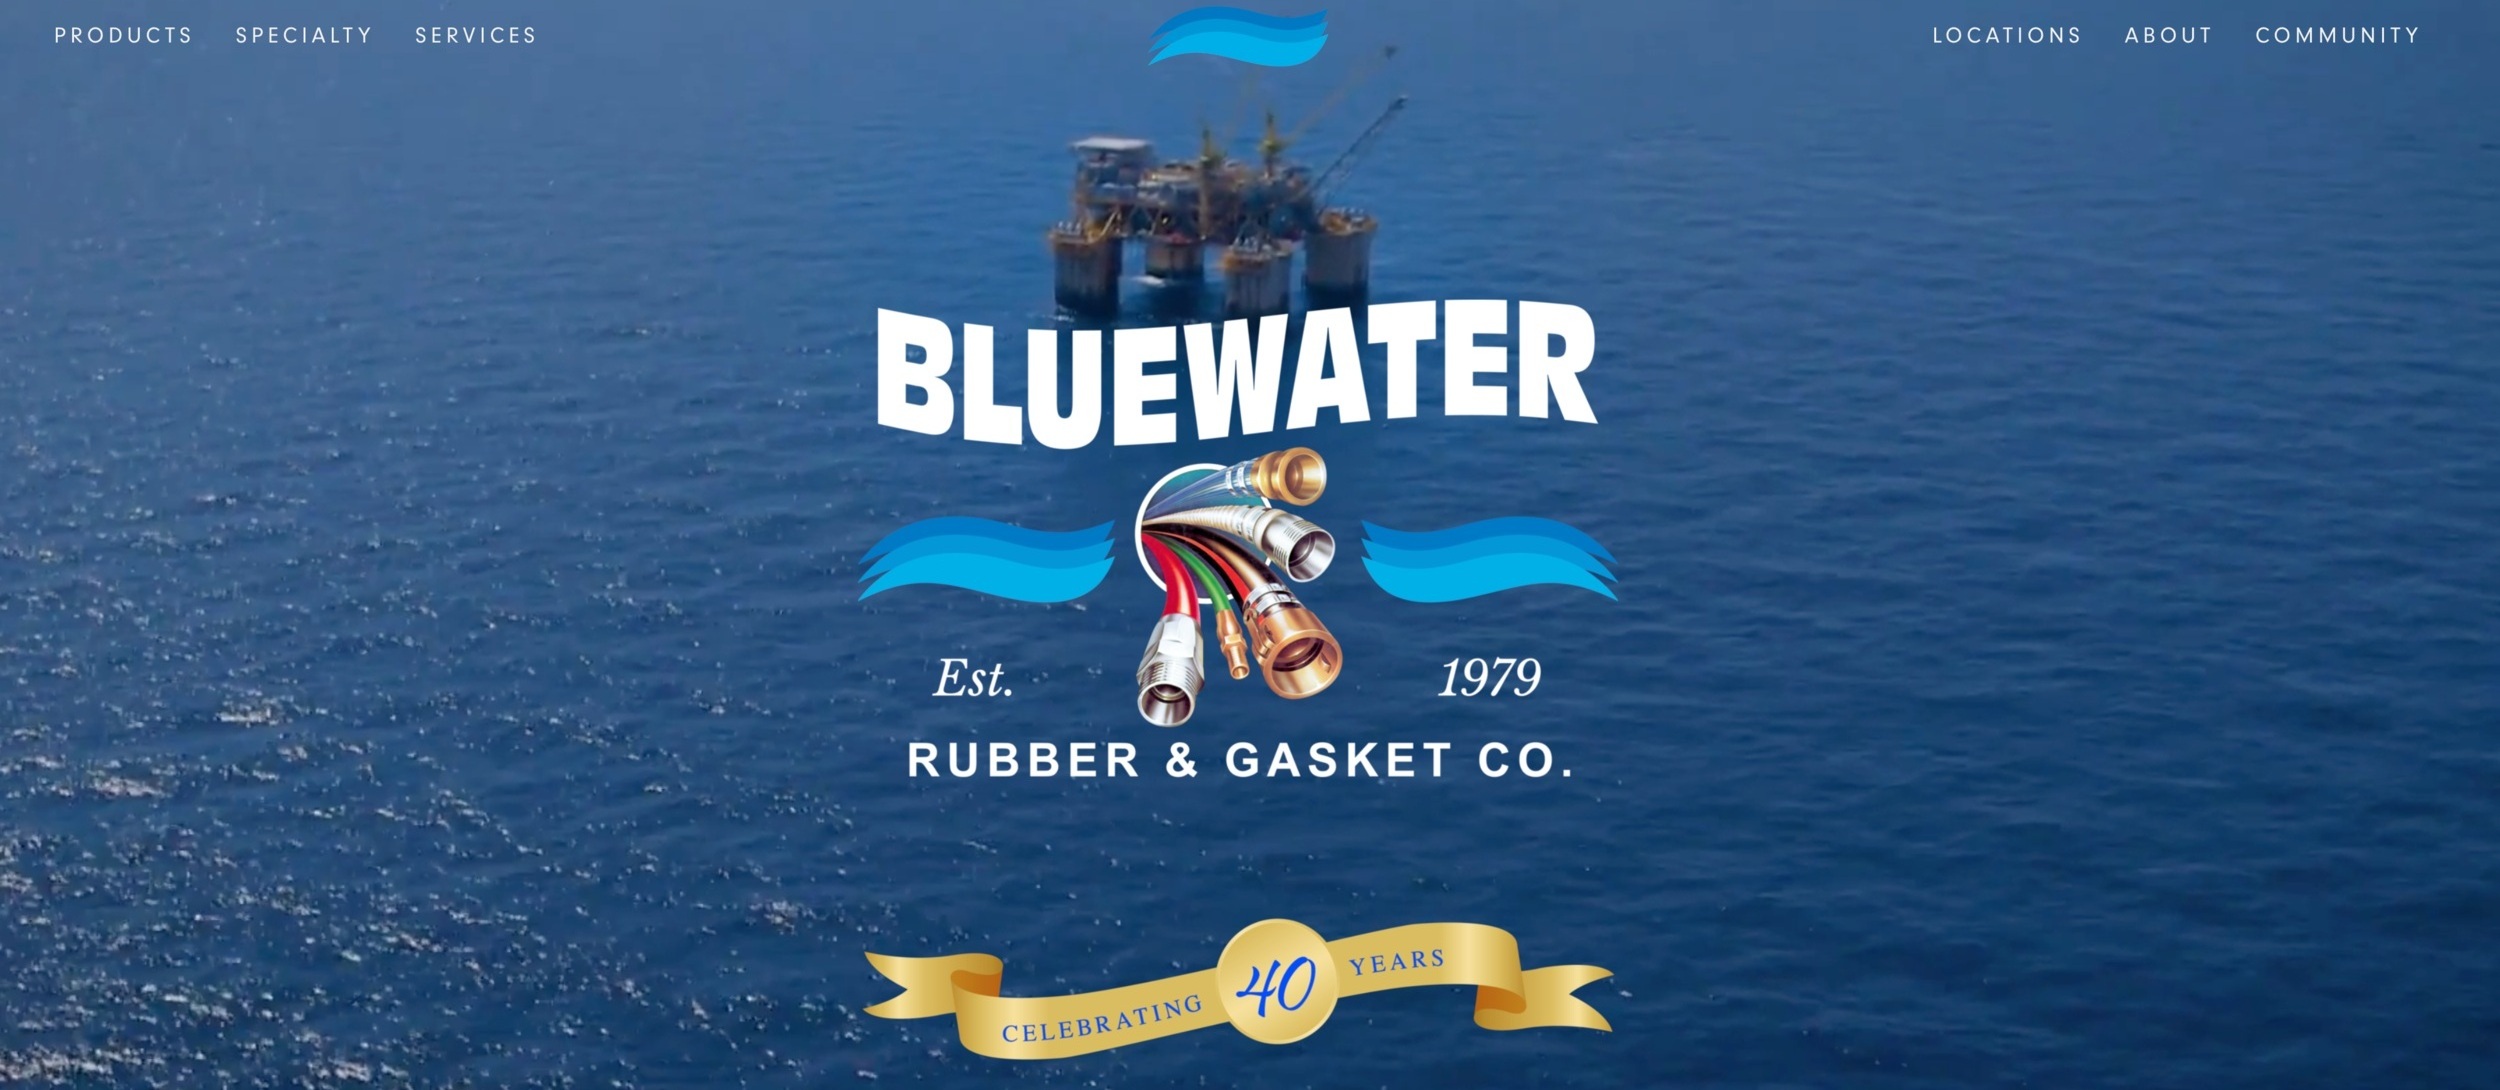 Bluewater Rubber